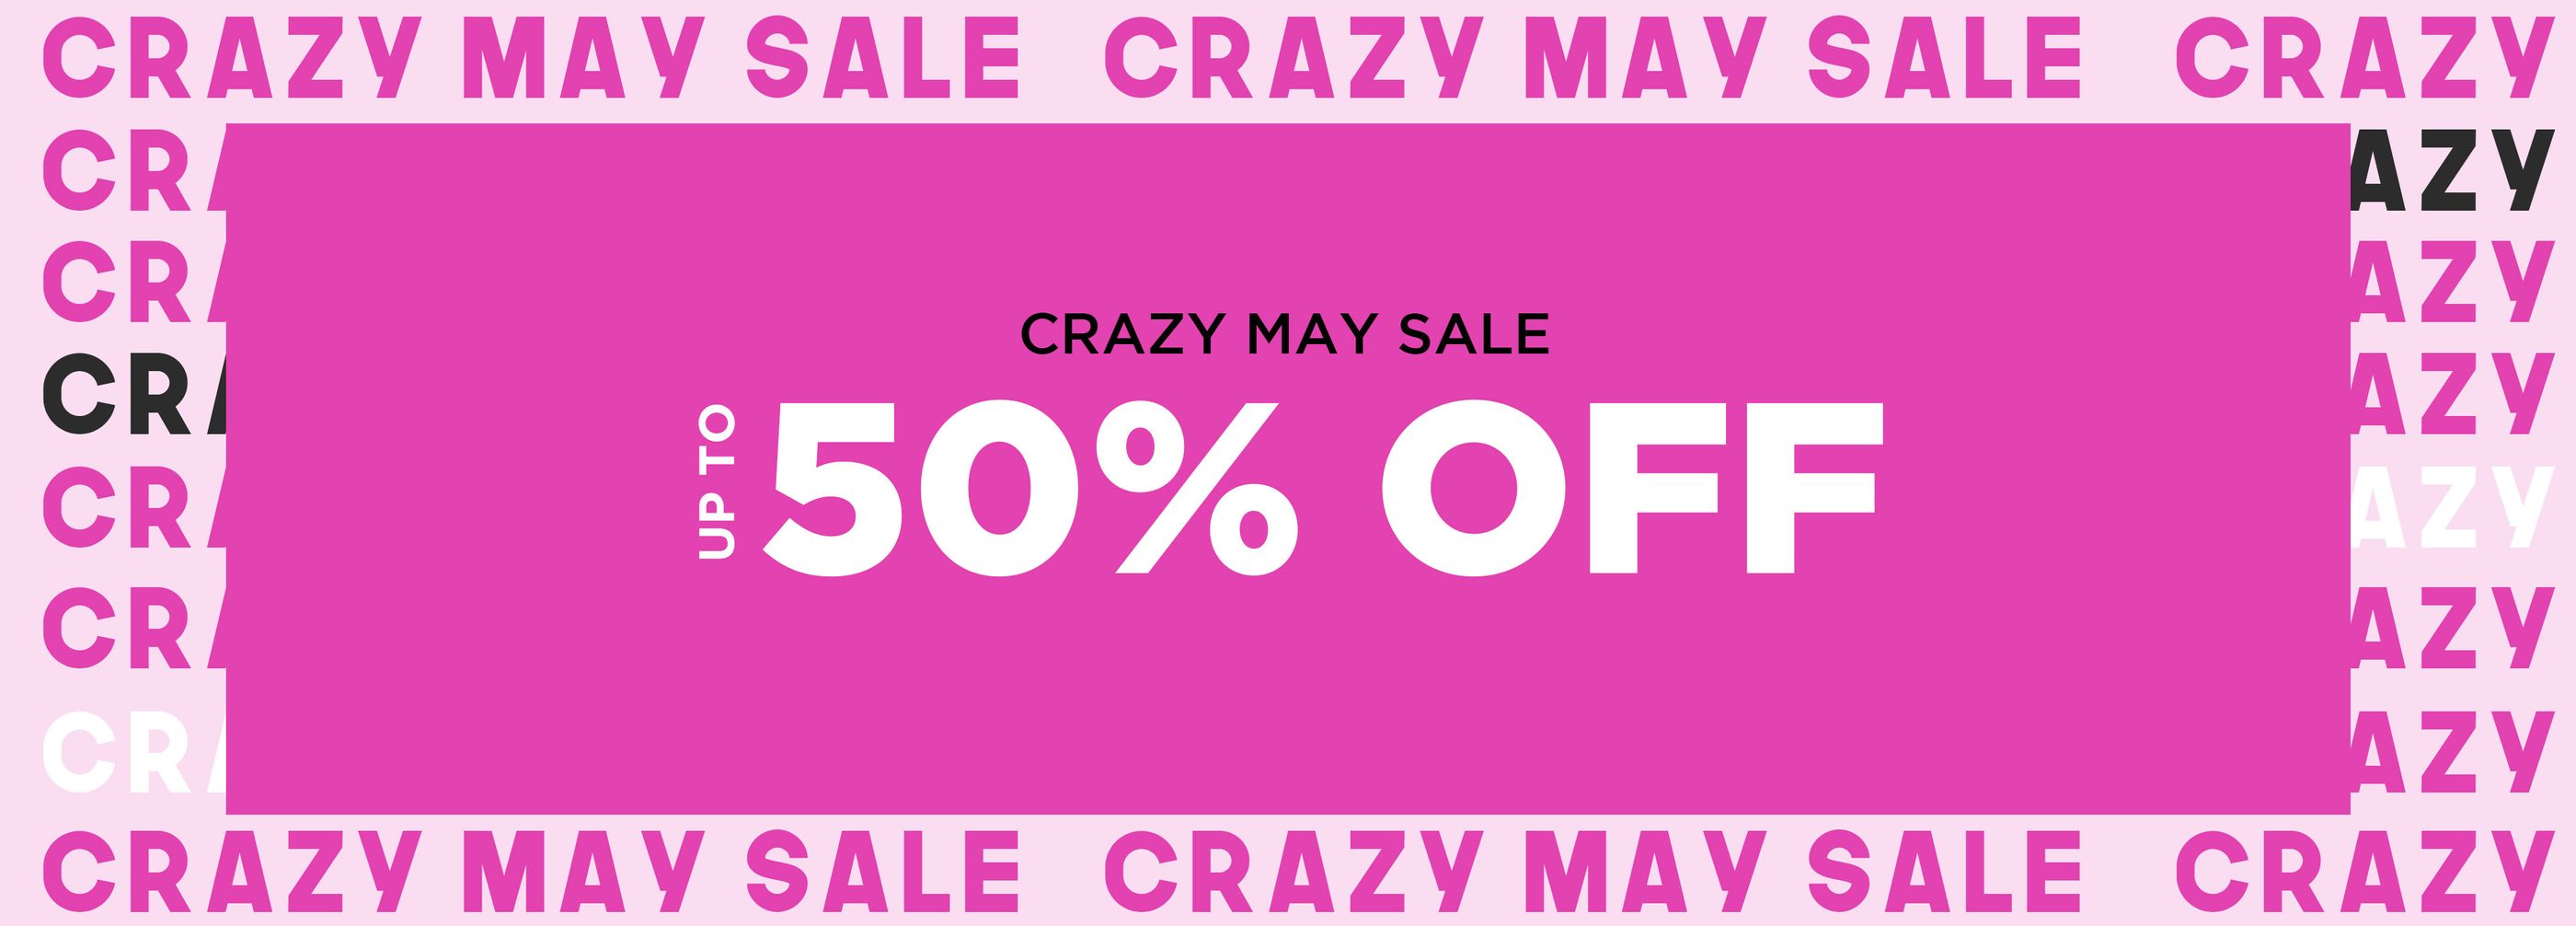 Crazy may sale